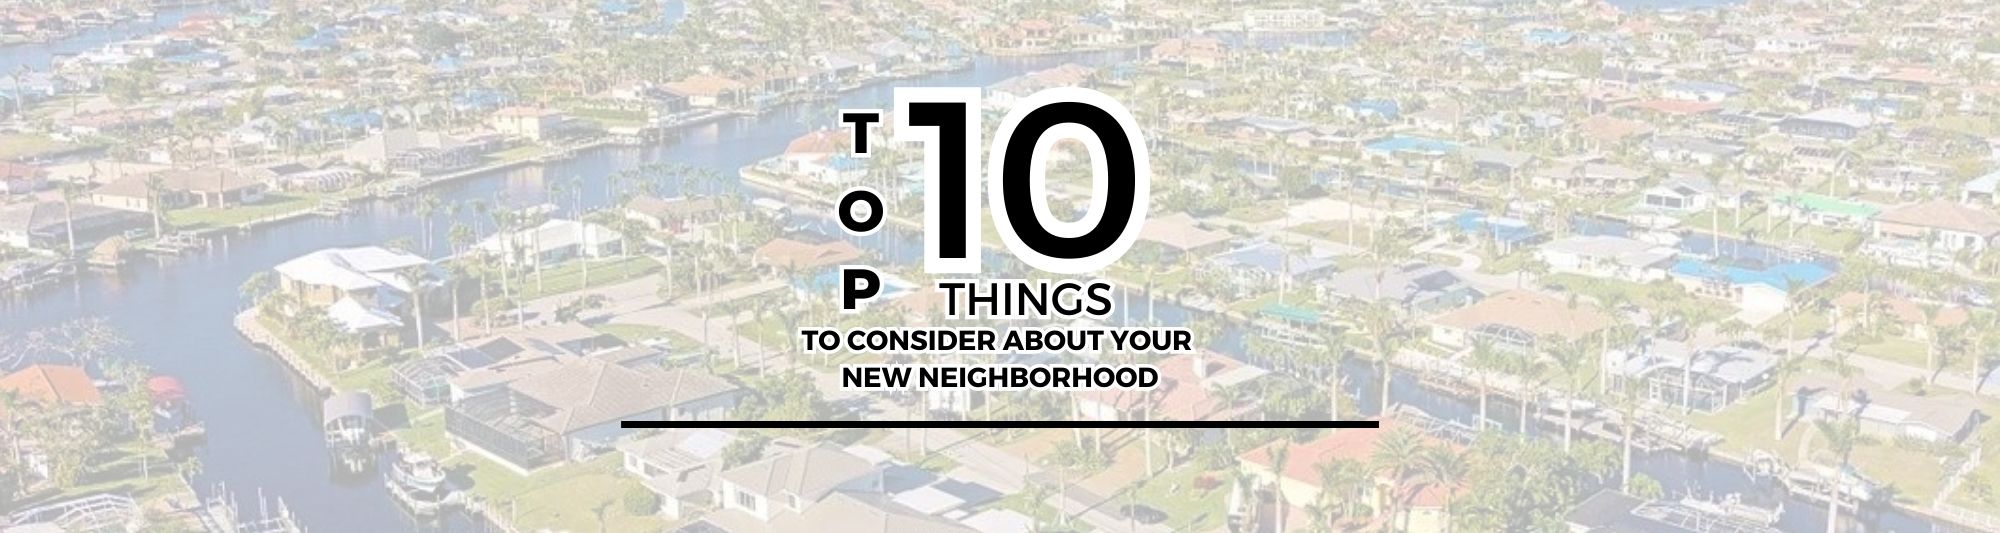 Aerial photo of a city with text over - top 10 things to consider about your new neighborhood